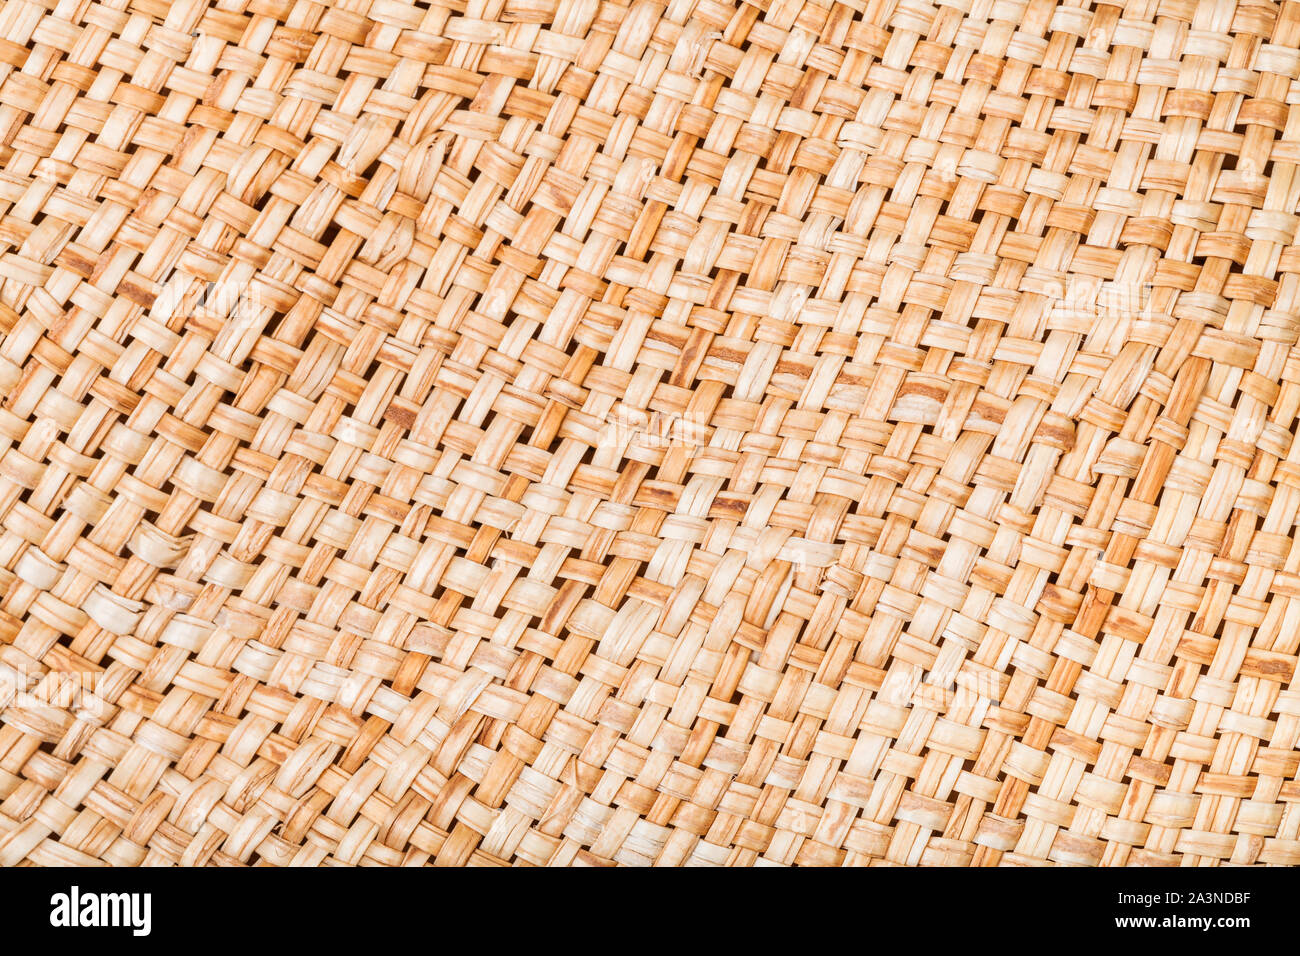 textile background - weaving of summer straw hat from natural raffia fibers close up Stock Photo